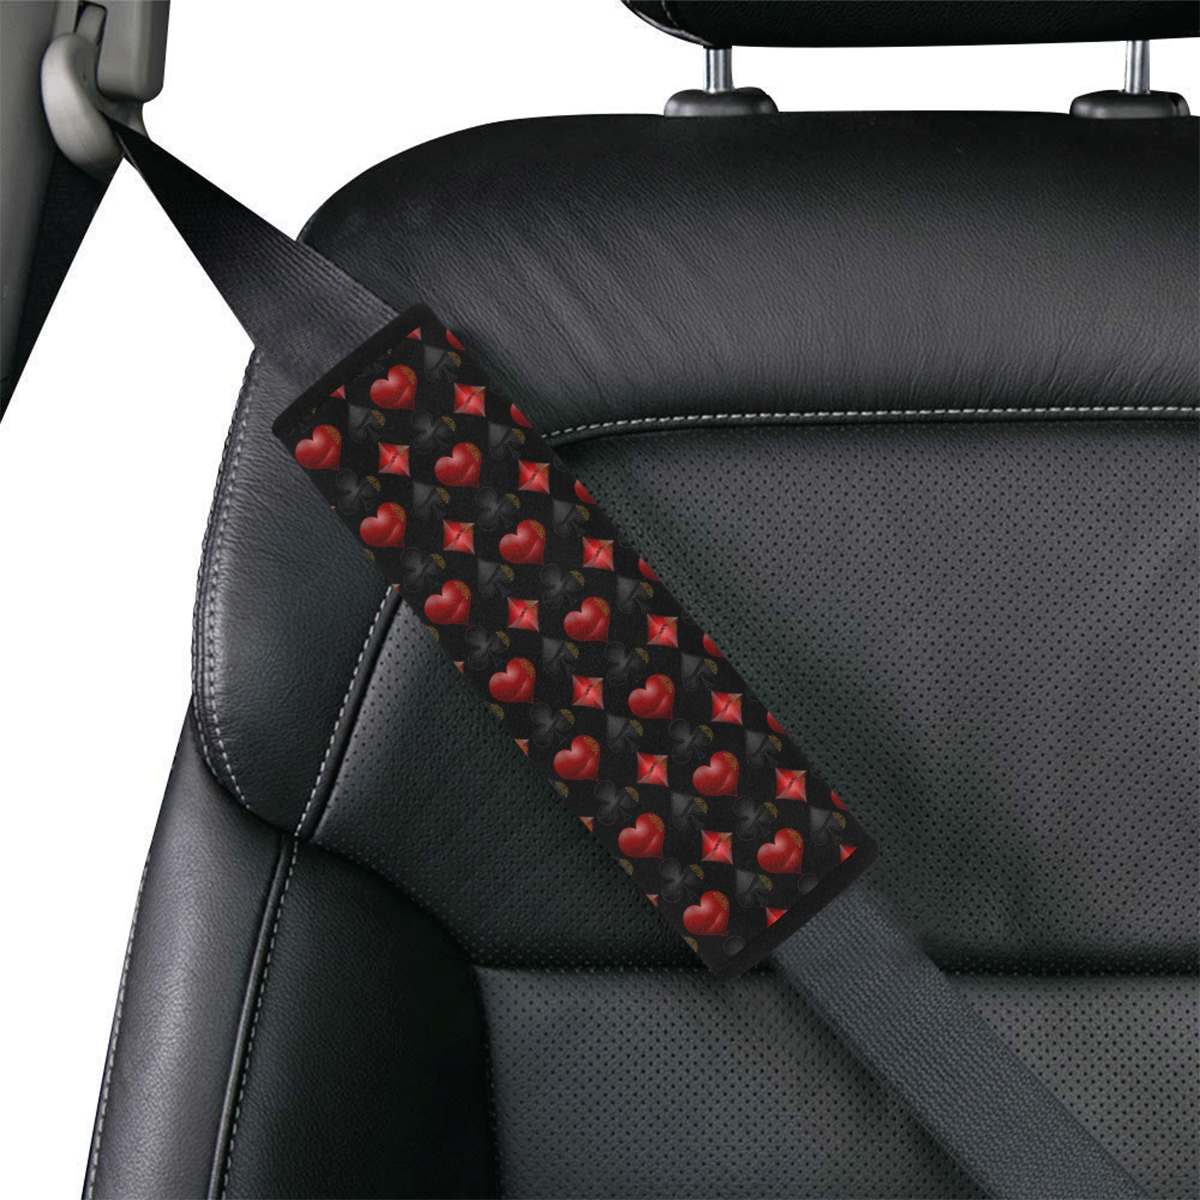 Las Vegas Black and Red Casino Poker Card Shapes on Black Car Seat Belt Cover 7''x8.5''